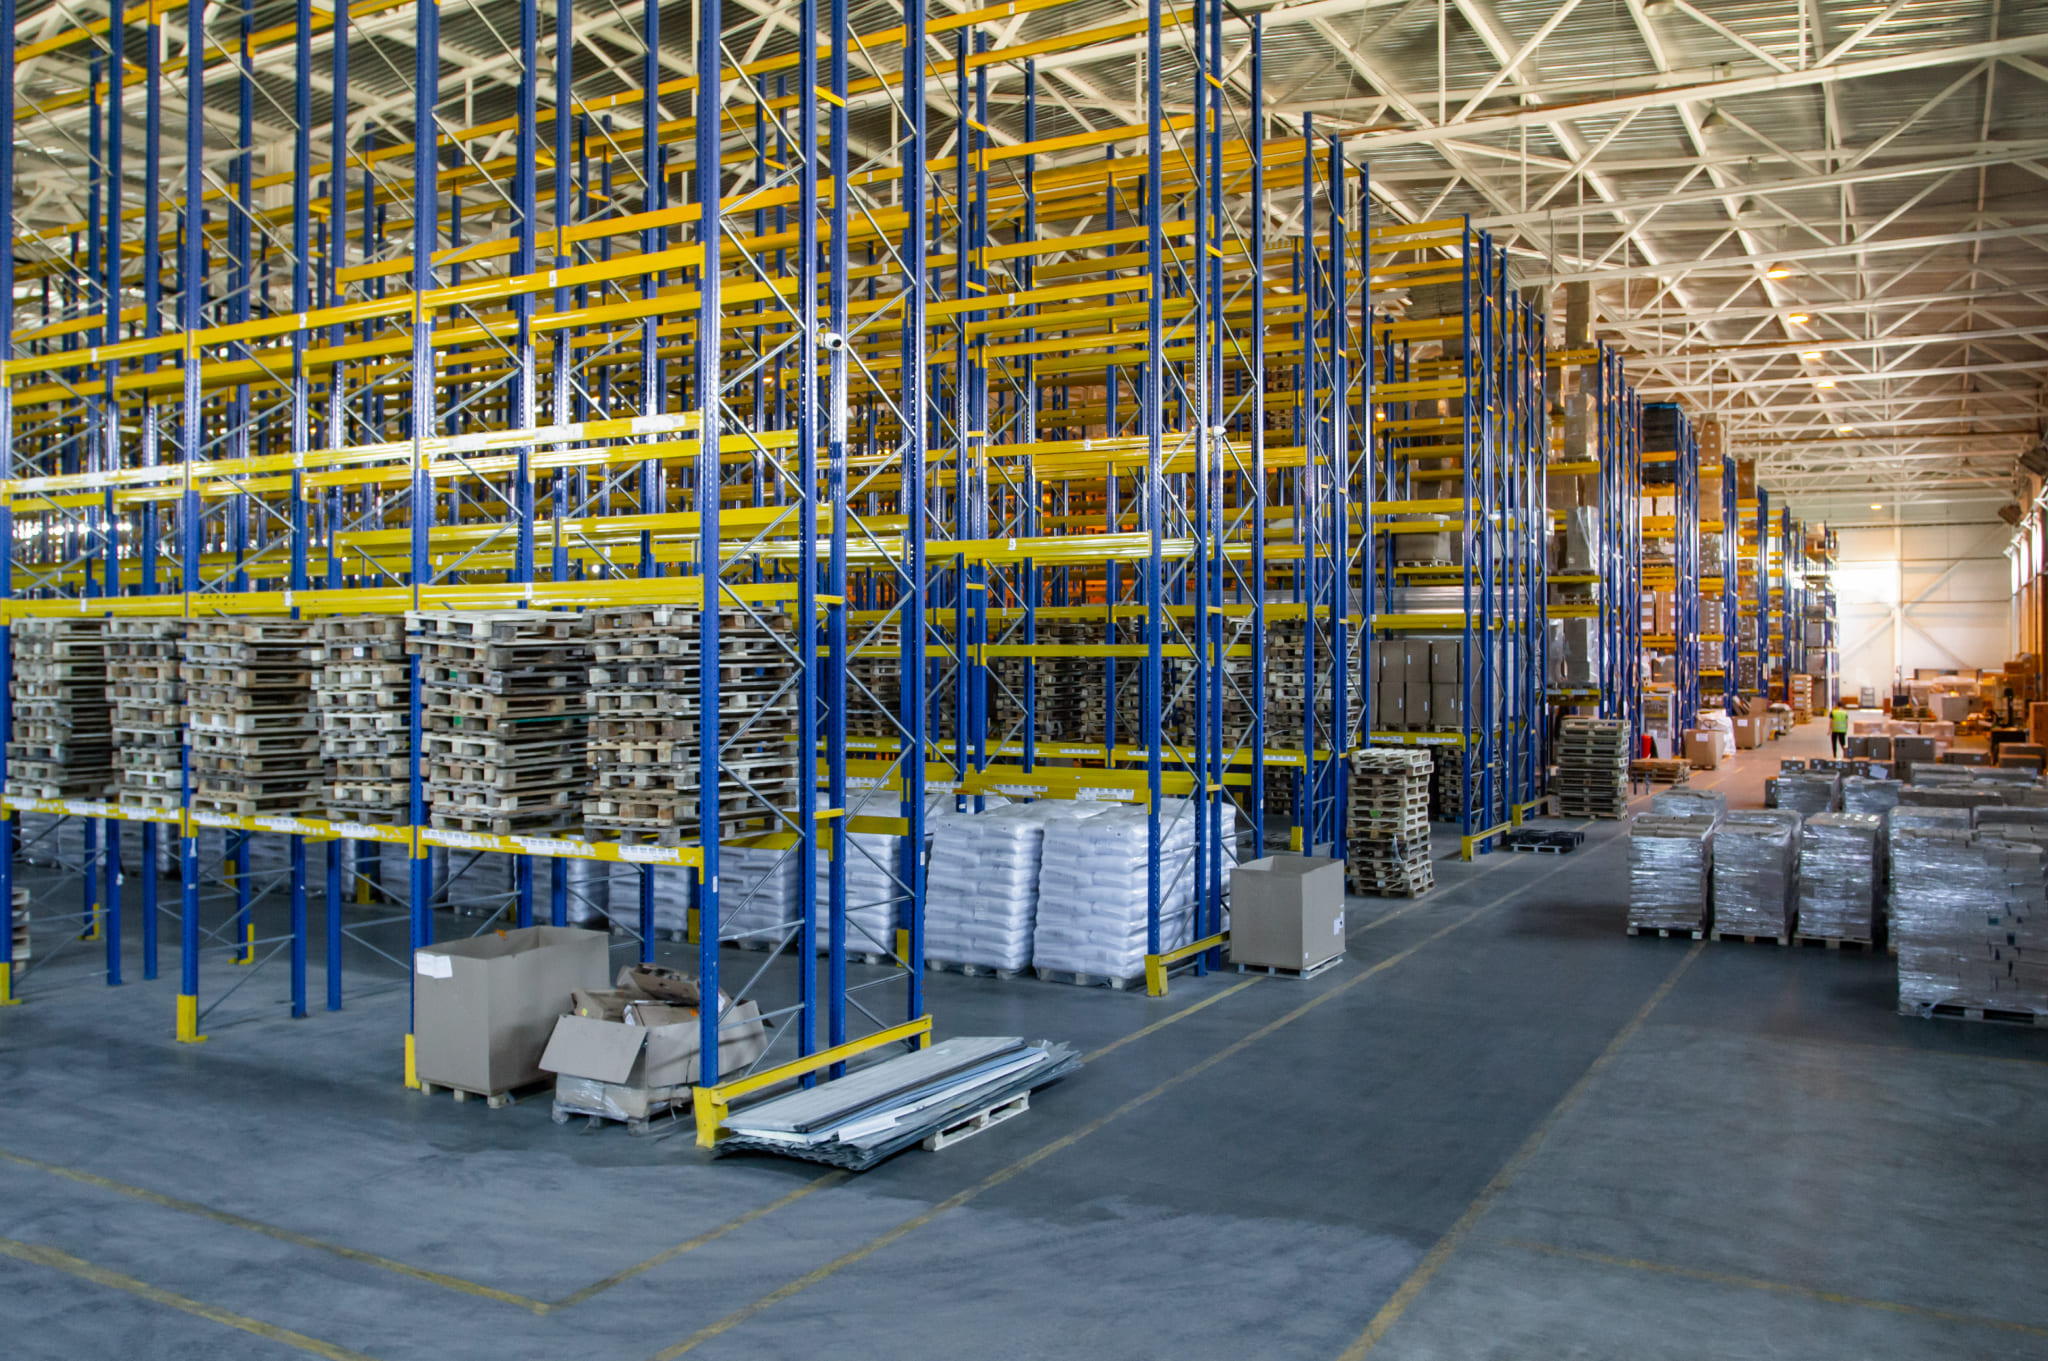 Assembly and disassembly of pallet racking